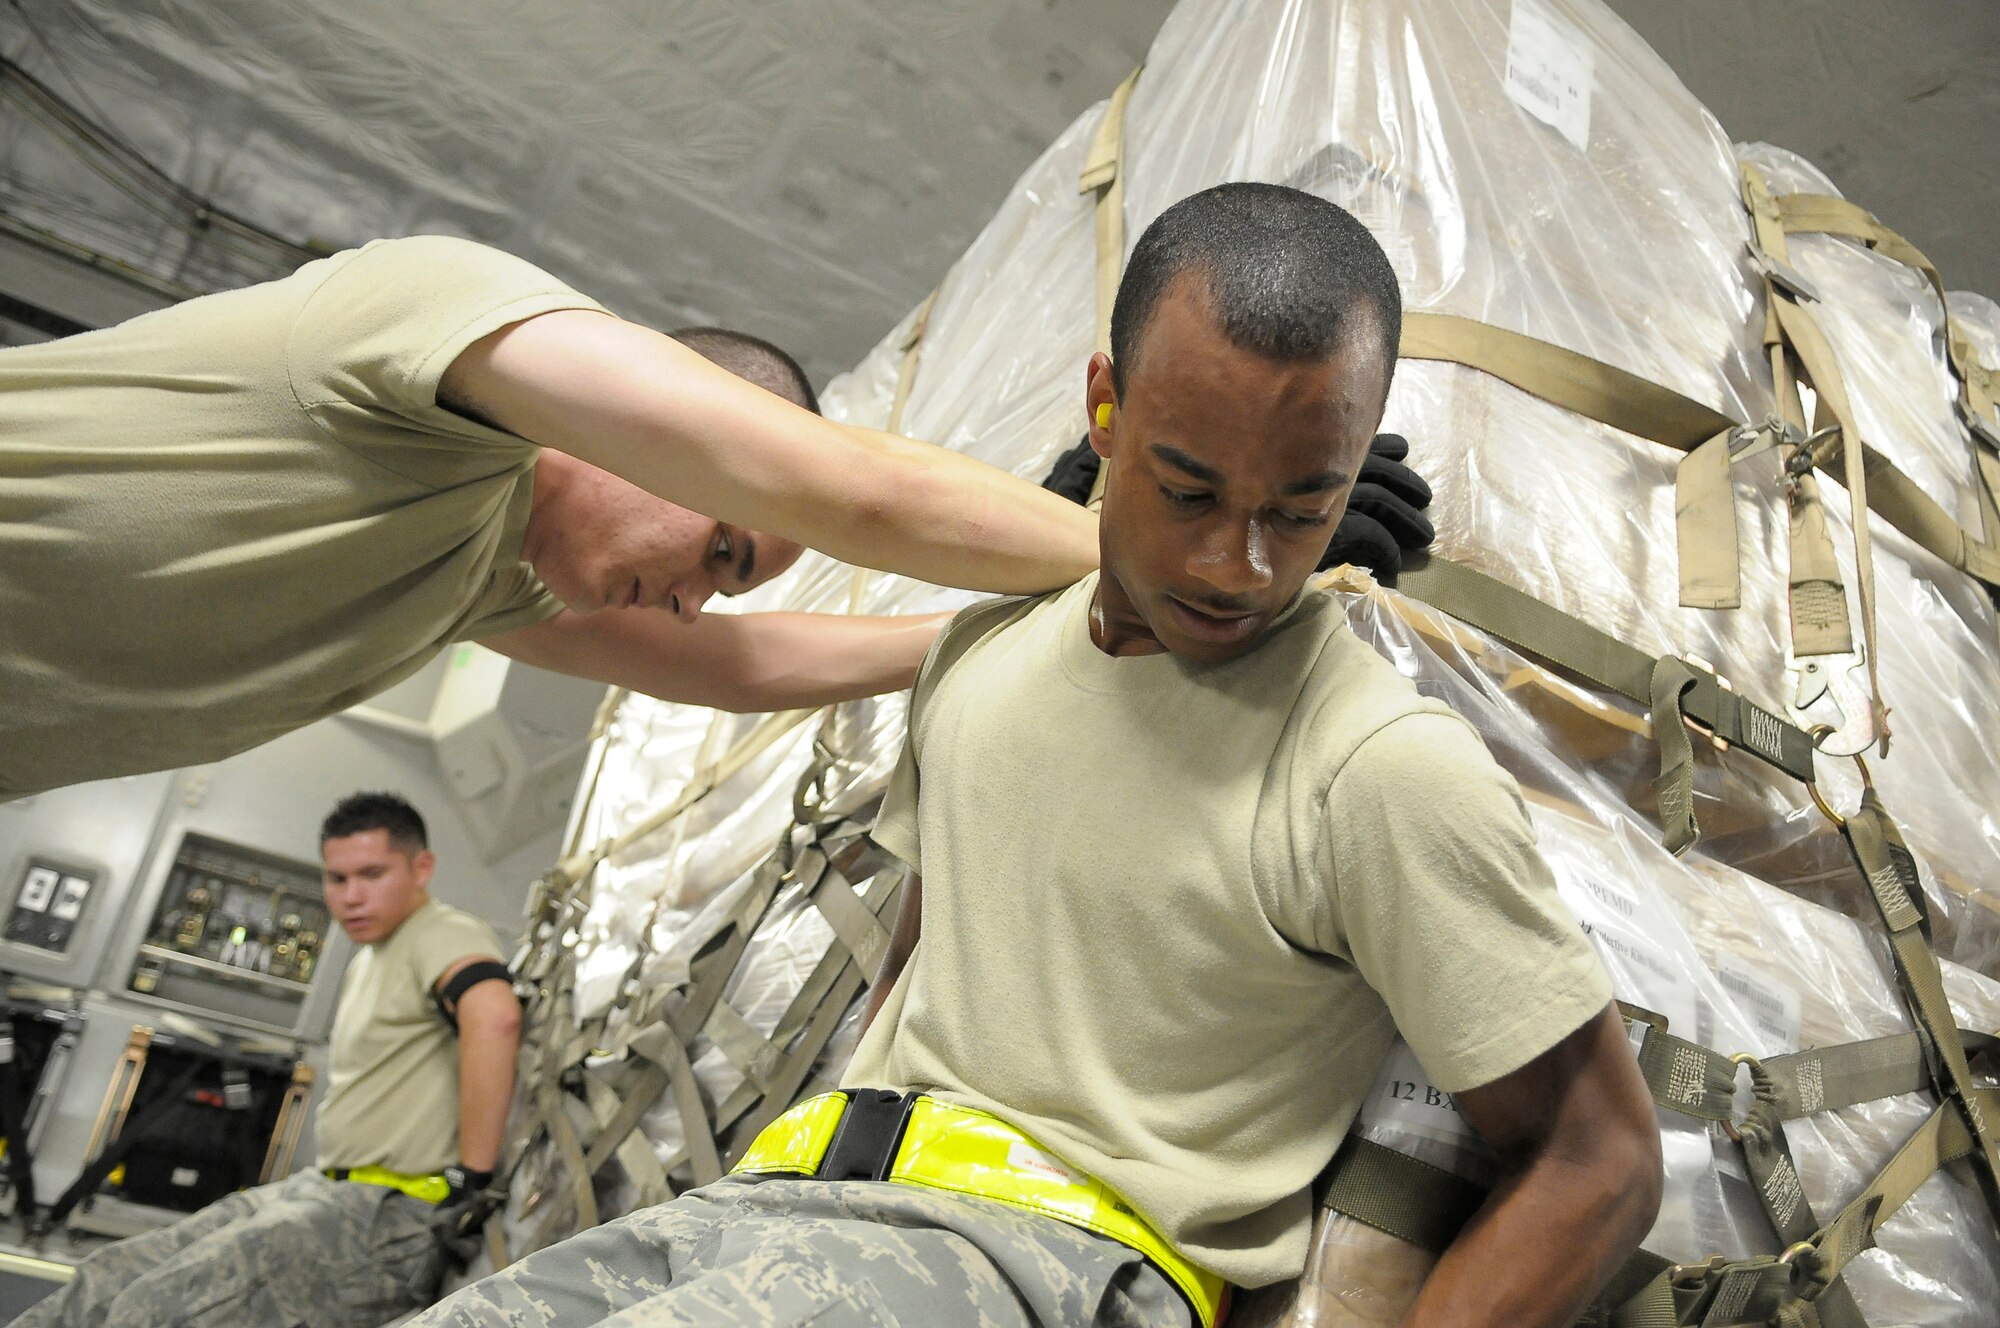 Airman 1st Class Marvin Richardson, front, Airman 1st Class Daniel Anderson, center, and Airman Rodrigo Maranon, back, push a pallet of personal protection kits onto a C-17 May 8 at Charleston Air Force Base, S.C. The personal protection kits were shipped to Haiti, El Salvador, Guatemala, Honduras and Nicaragua, where health-care officials are responding to confirmed and suspected cases of H1N1 Influenza-A infections. U.S. Southern Command, with headquarters in Miami, directed the mission after learning health officials submitted requests for assistance to U.S. embassies in their respective countries. Airmen Richardson, Anderson and Maranon are air transportation specialists with 437th Aerial Port Squadron at Charleston AFB. (U.S. Air Force photo/James M. Bowman)